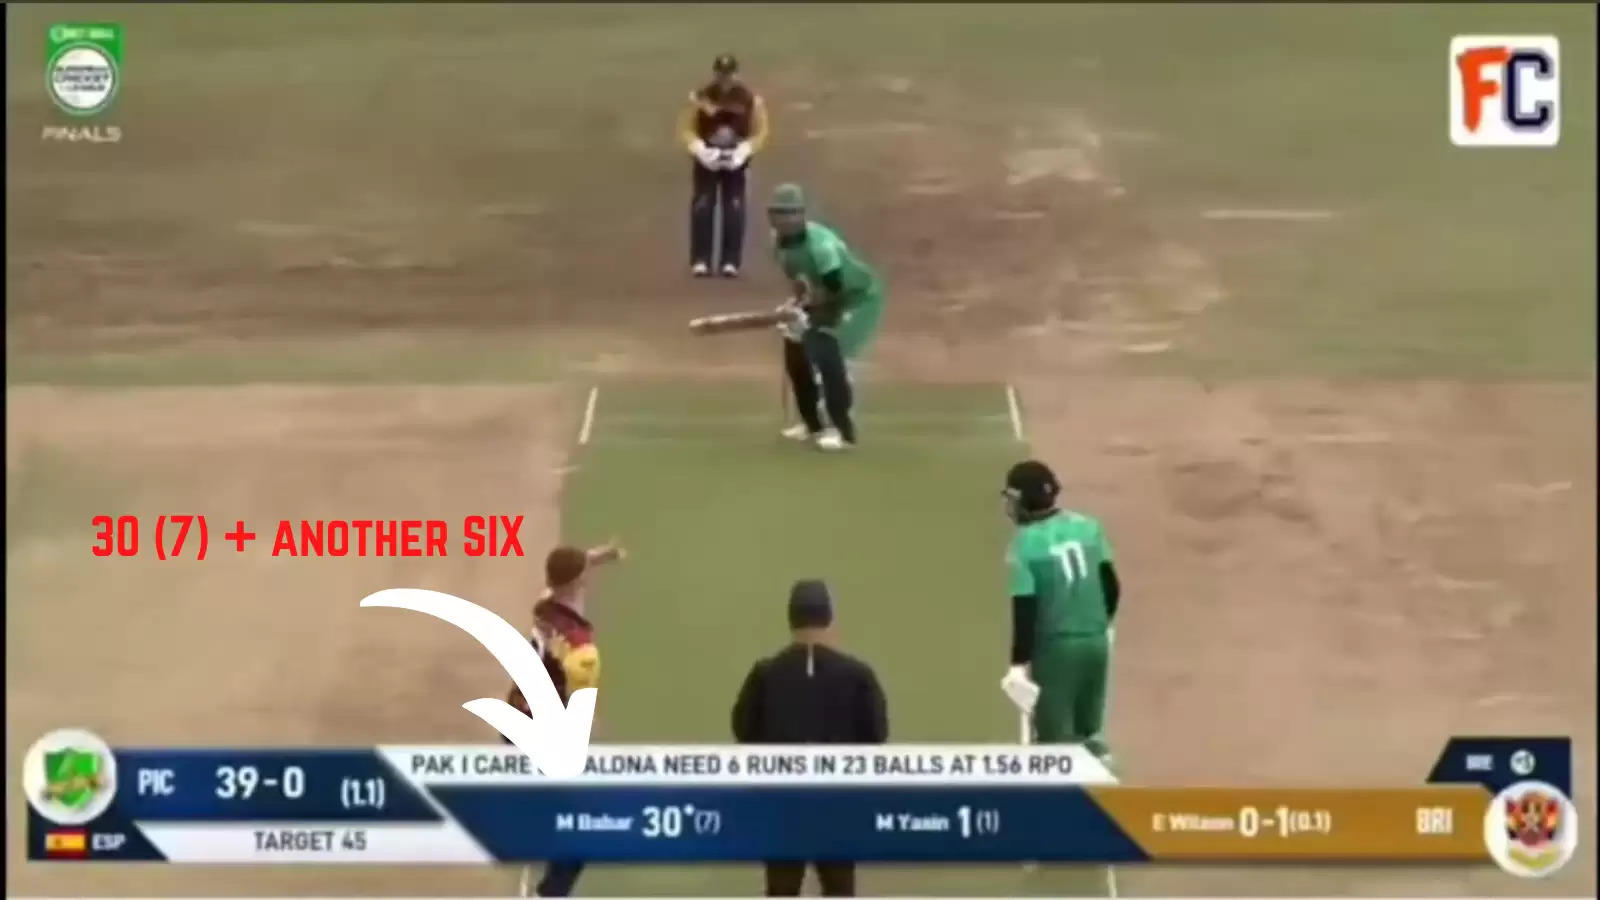 WATCH: Batter hits six sixes to complete run-chase in 10 balls in 5-over game in ECL